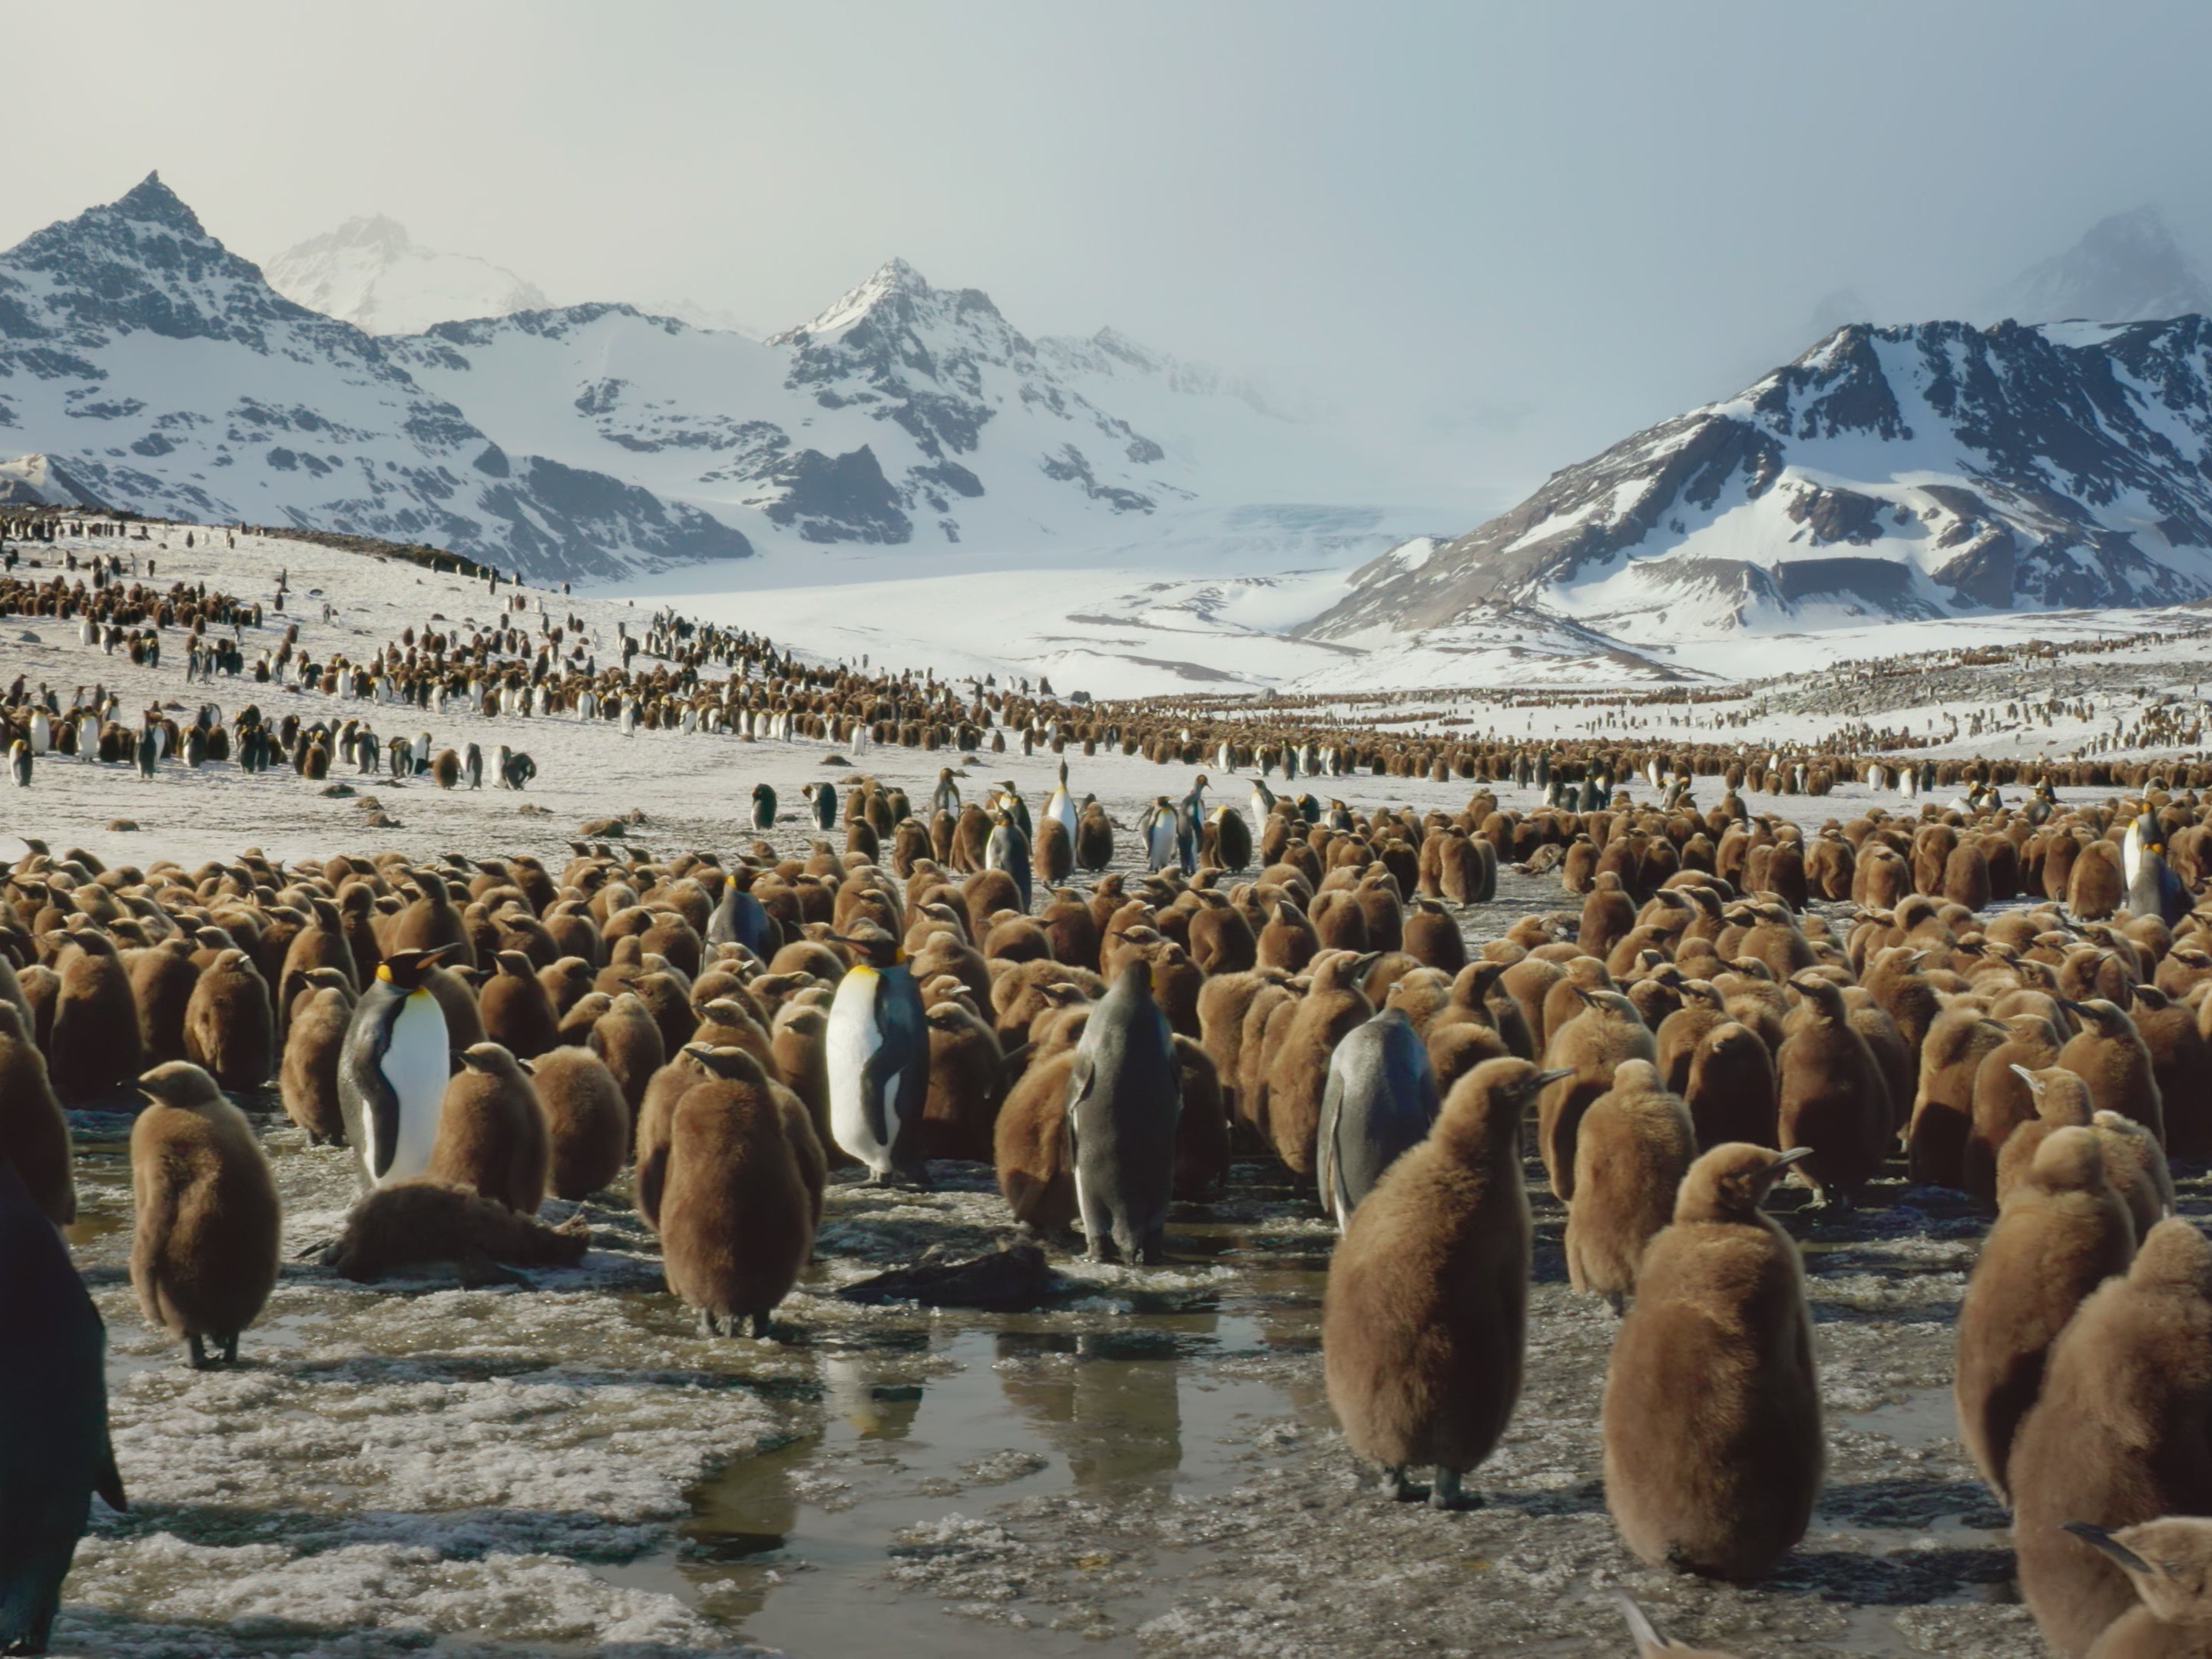 Emperor penguins leave their chicks to fend for themselves